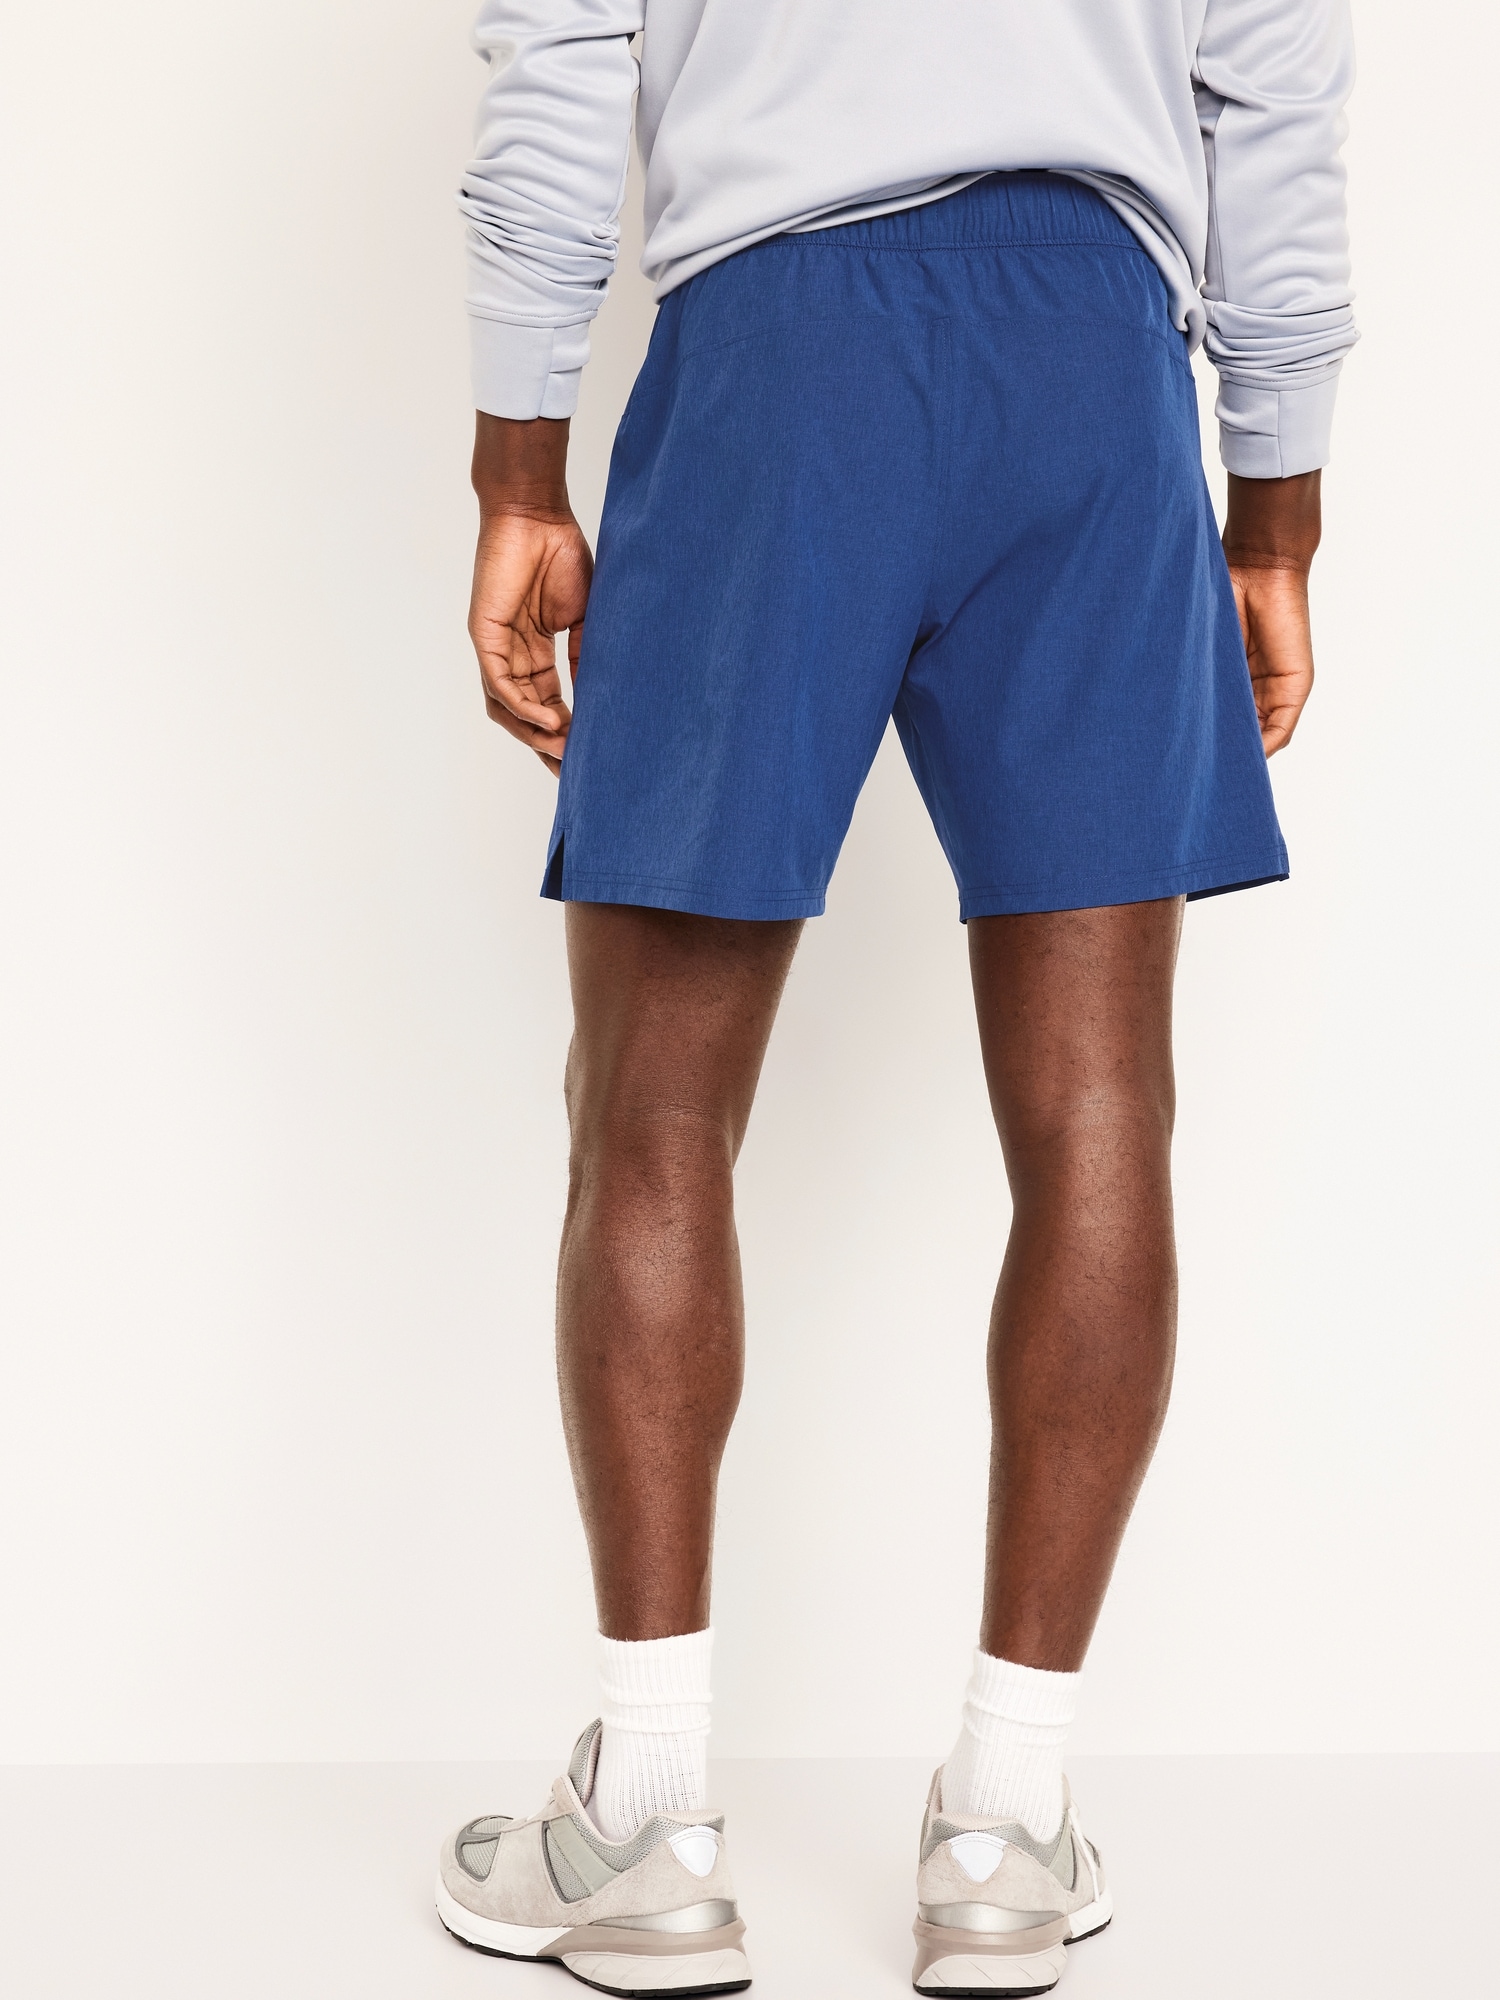 Buy the Nike Nike Flex Woven Training Shorts in Navy Blue on